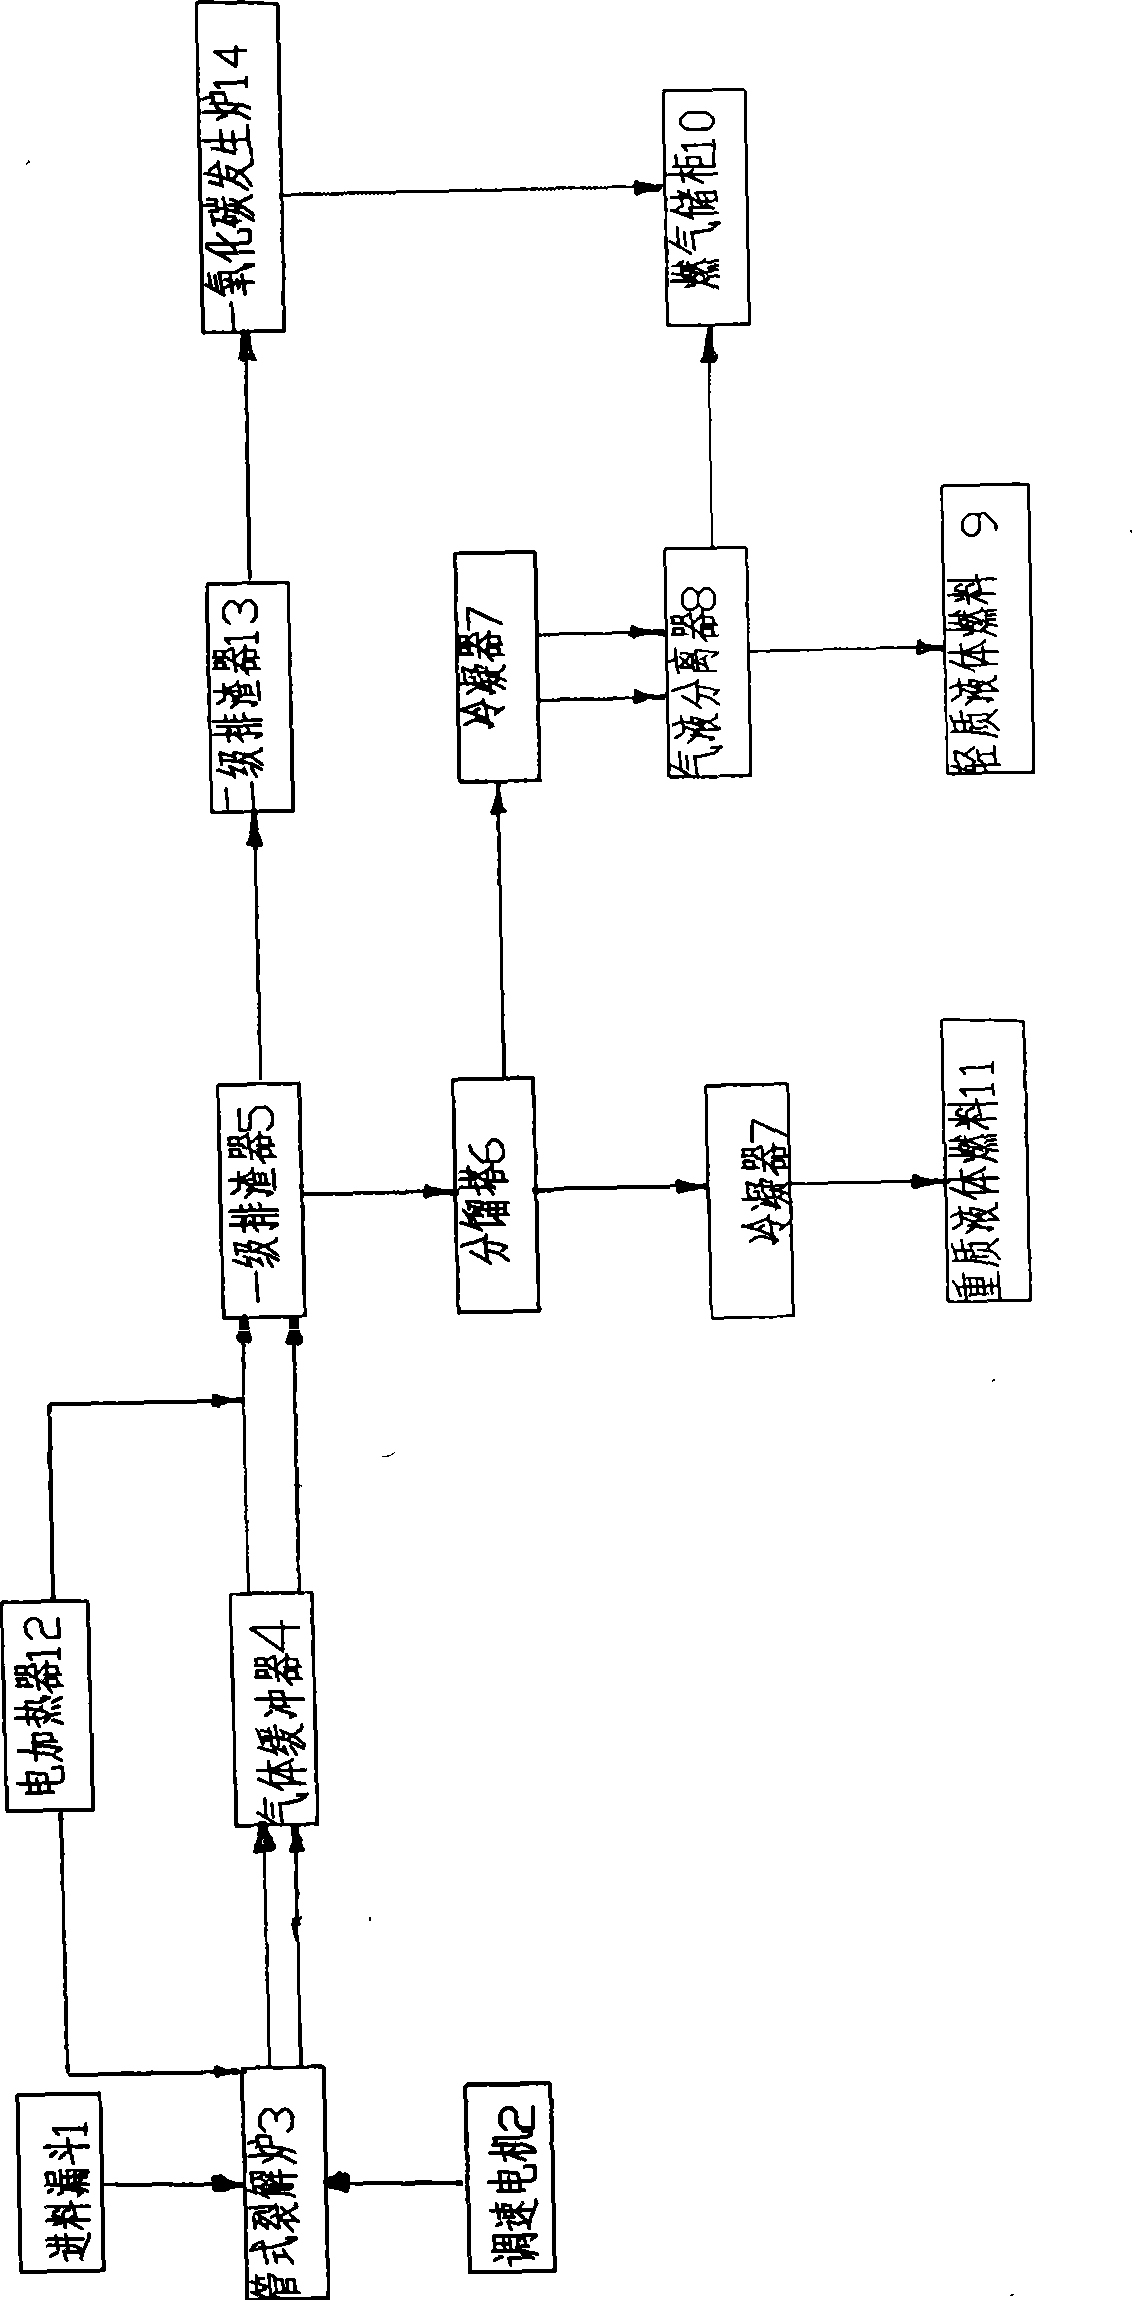 Method and special equipment for recycling to produce fuel